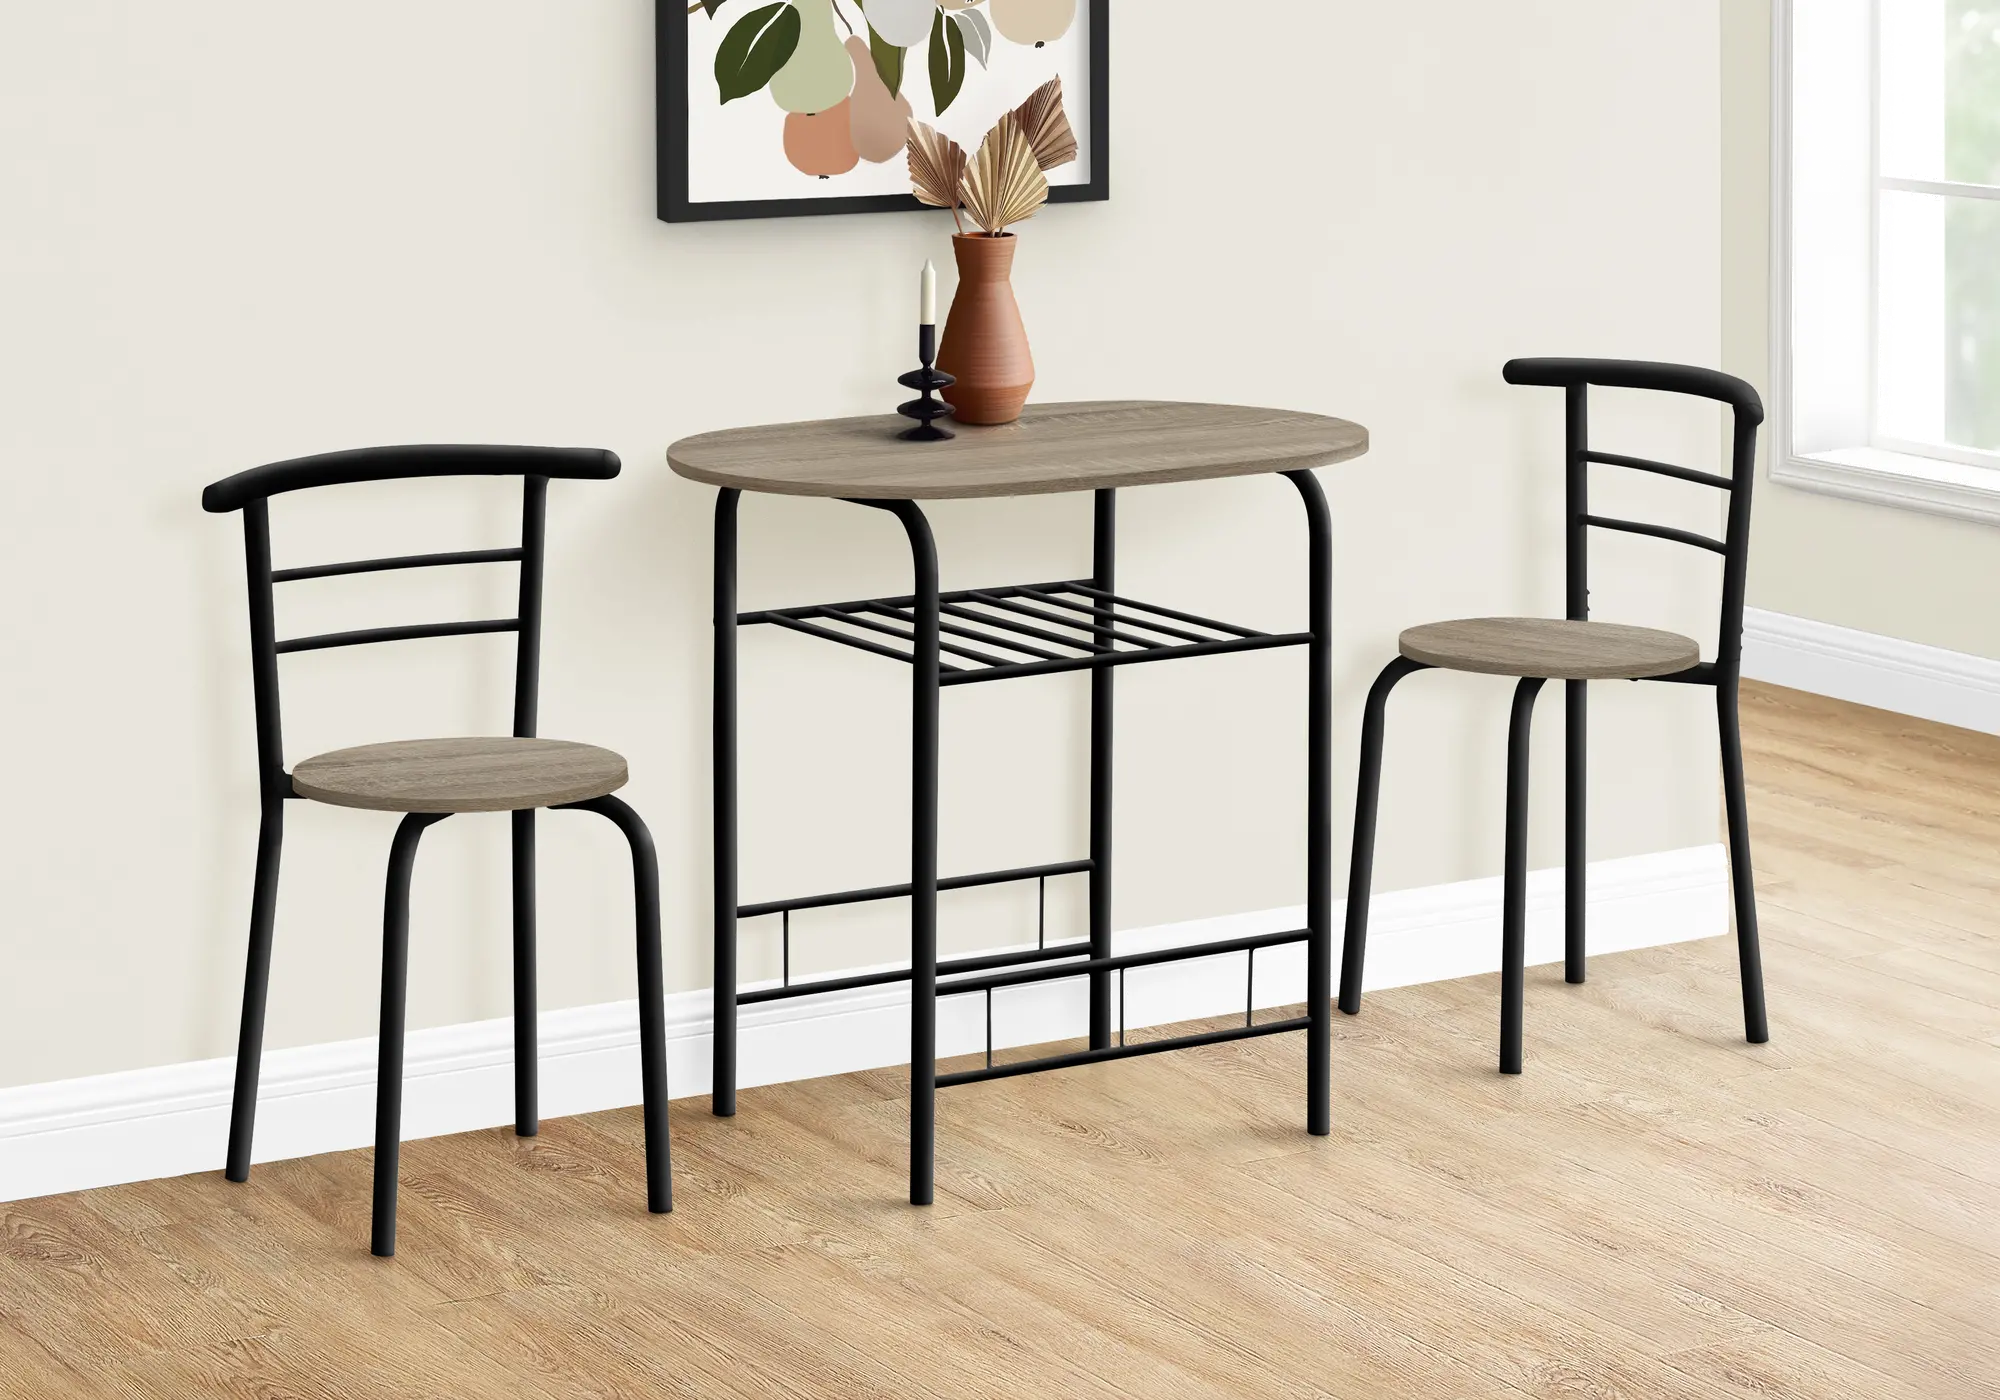 Avery Taupe and Black 3 Piece Dining Set